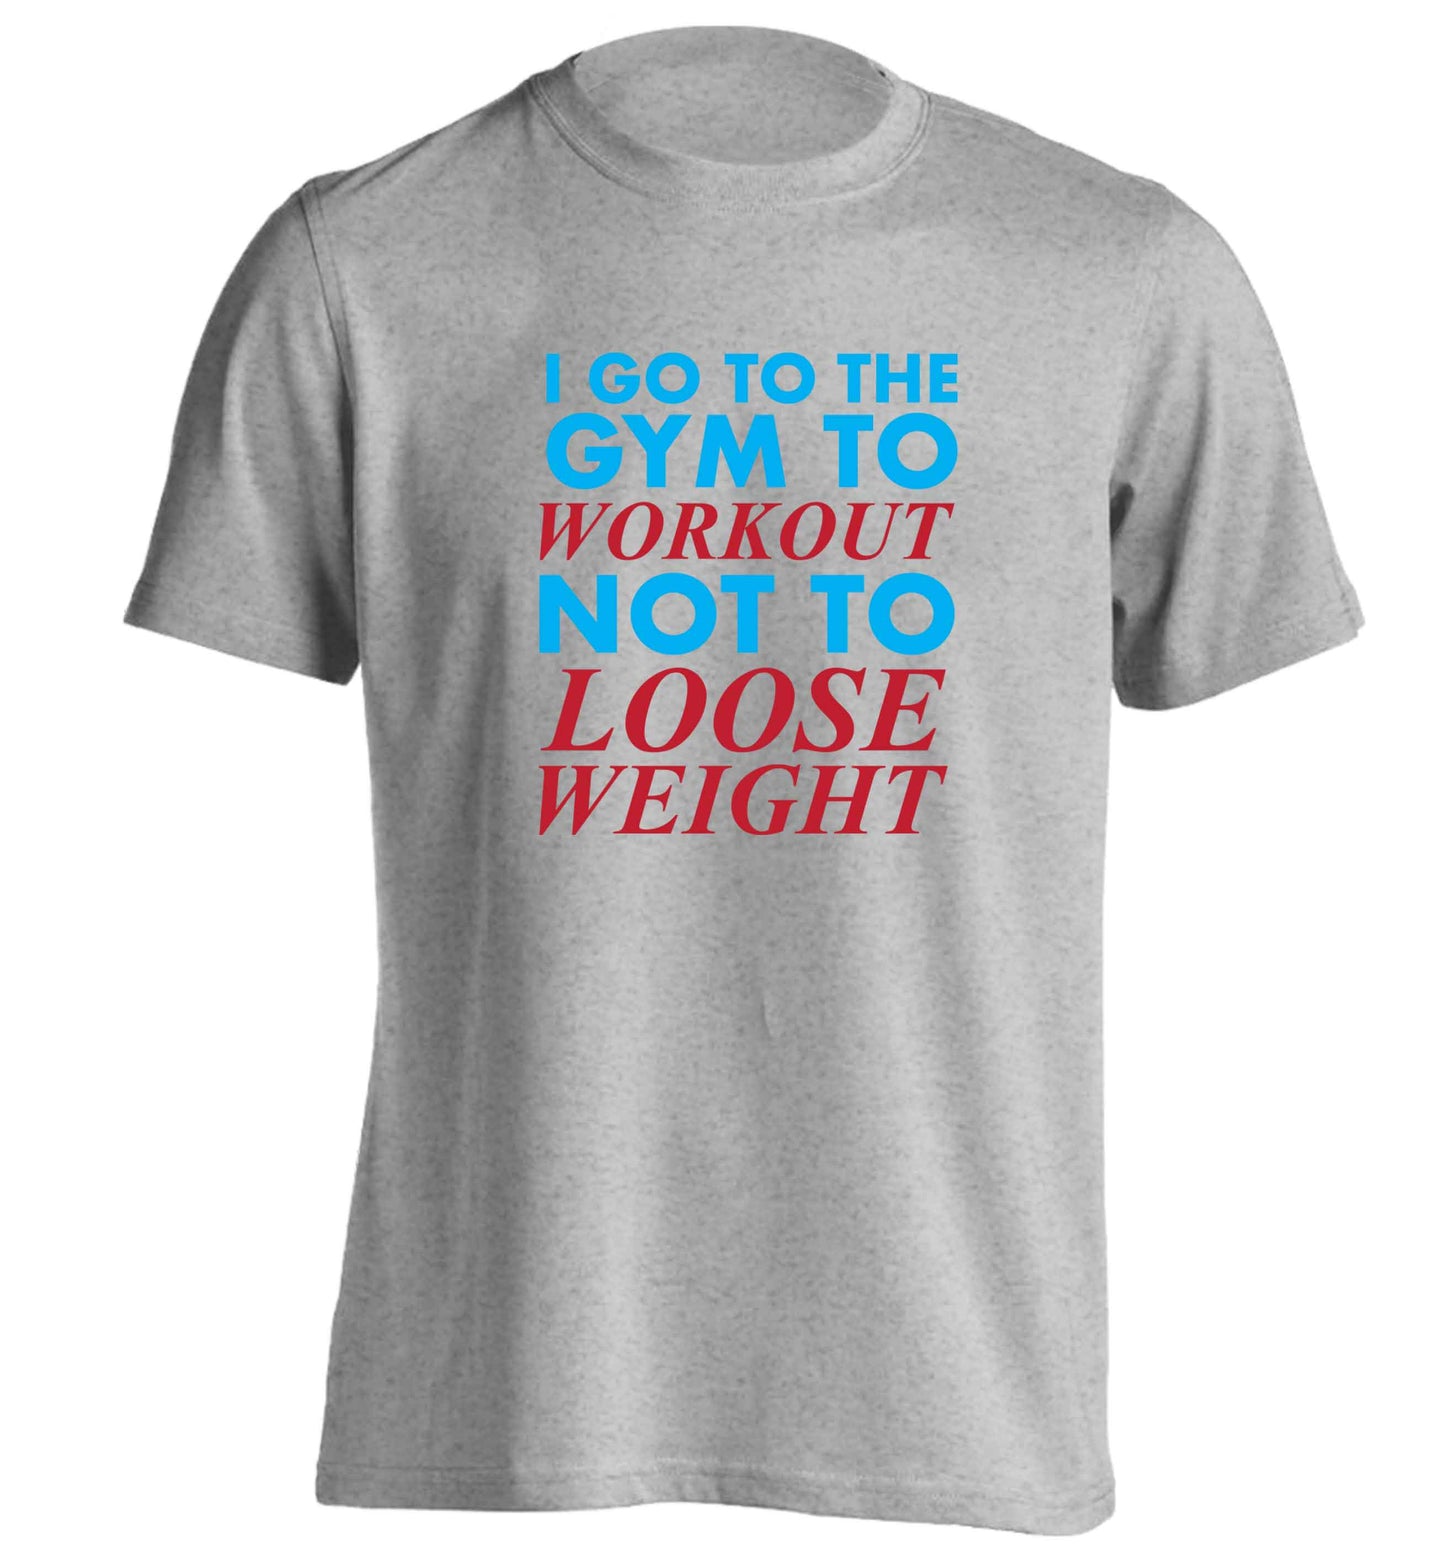 I go to the gym to workout not to loose weight adults unisex grey Tshirt 2XL